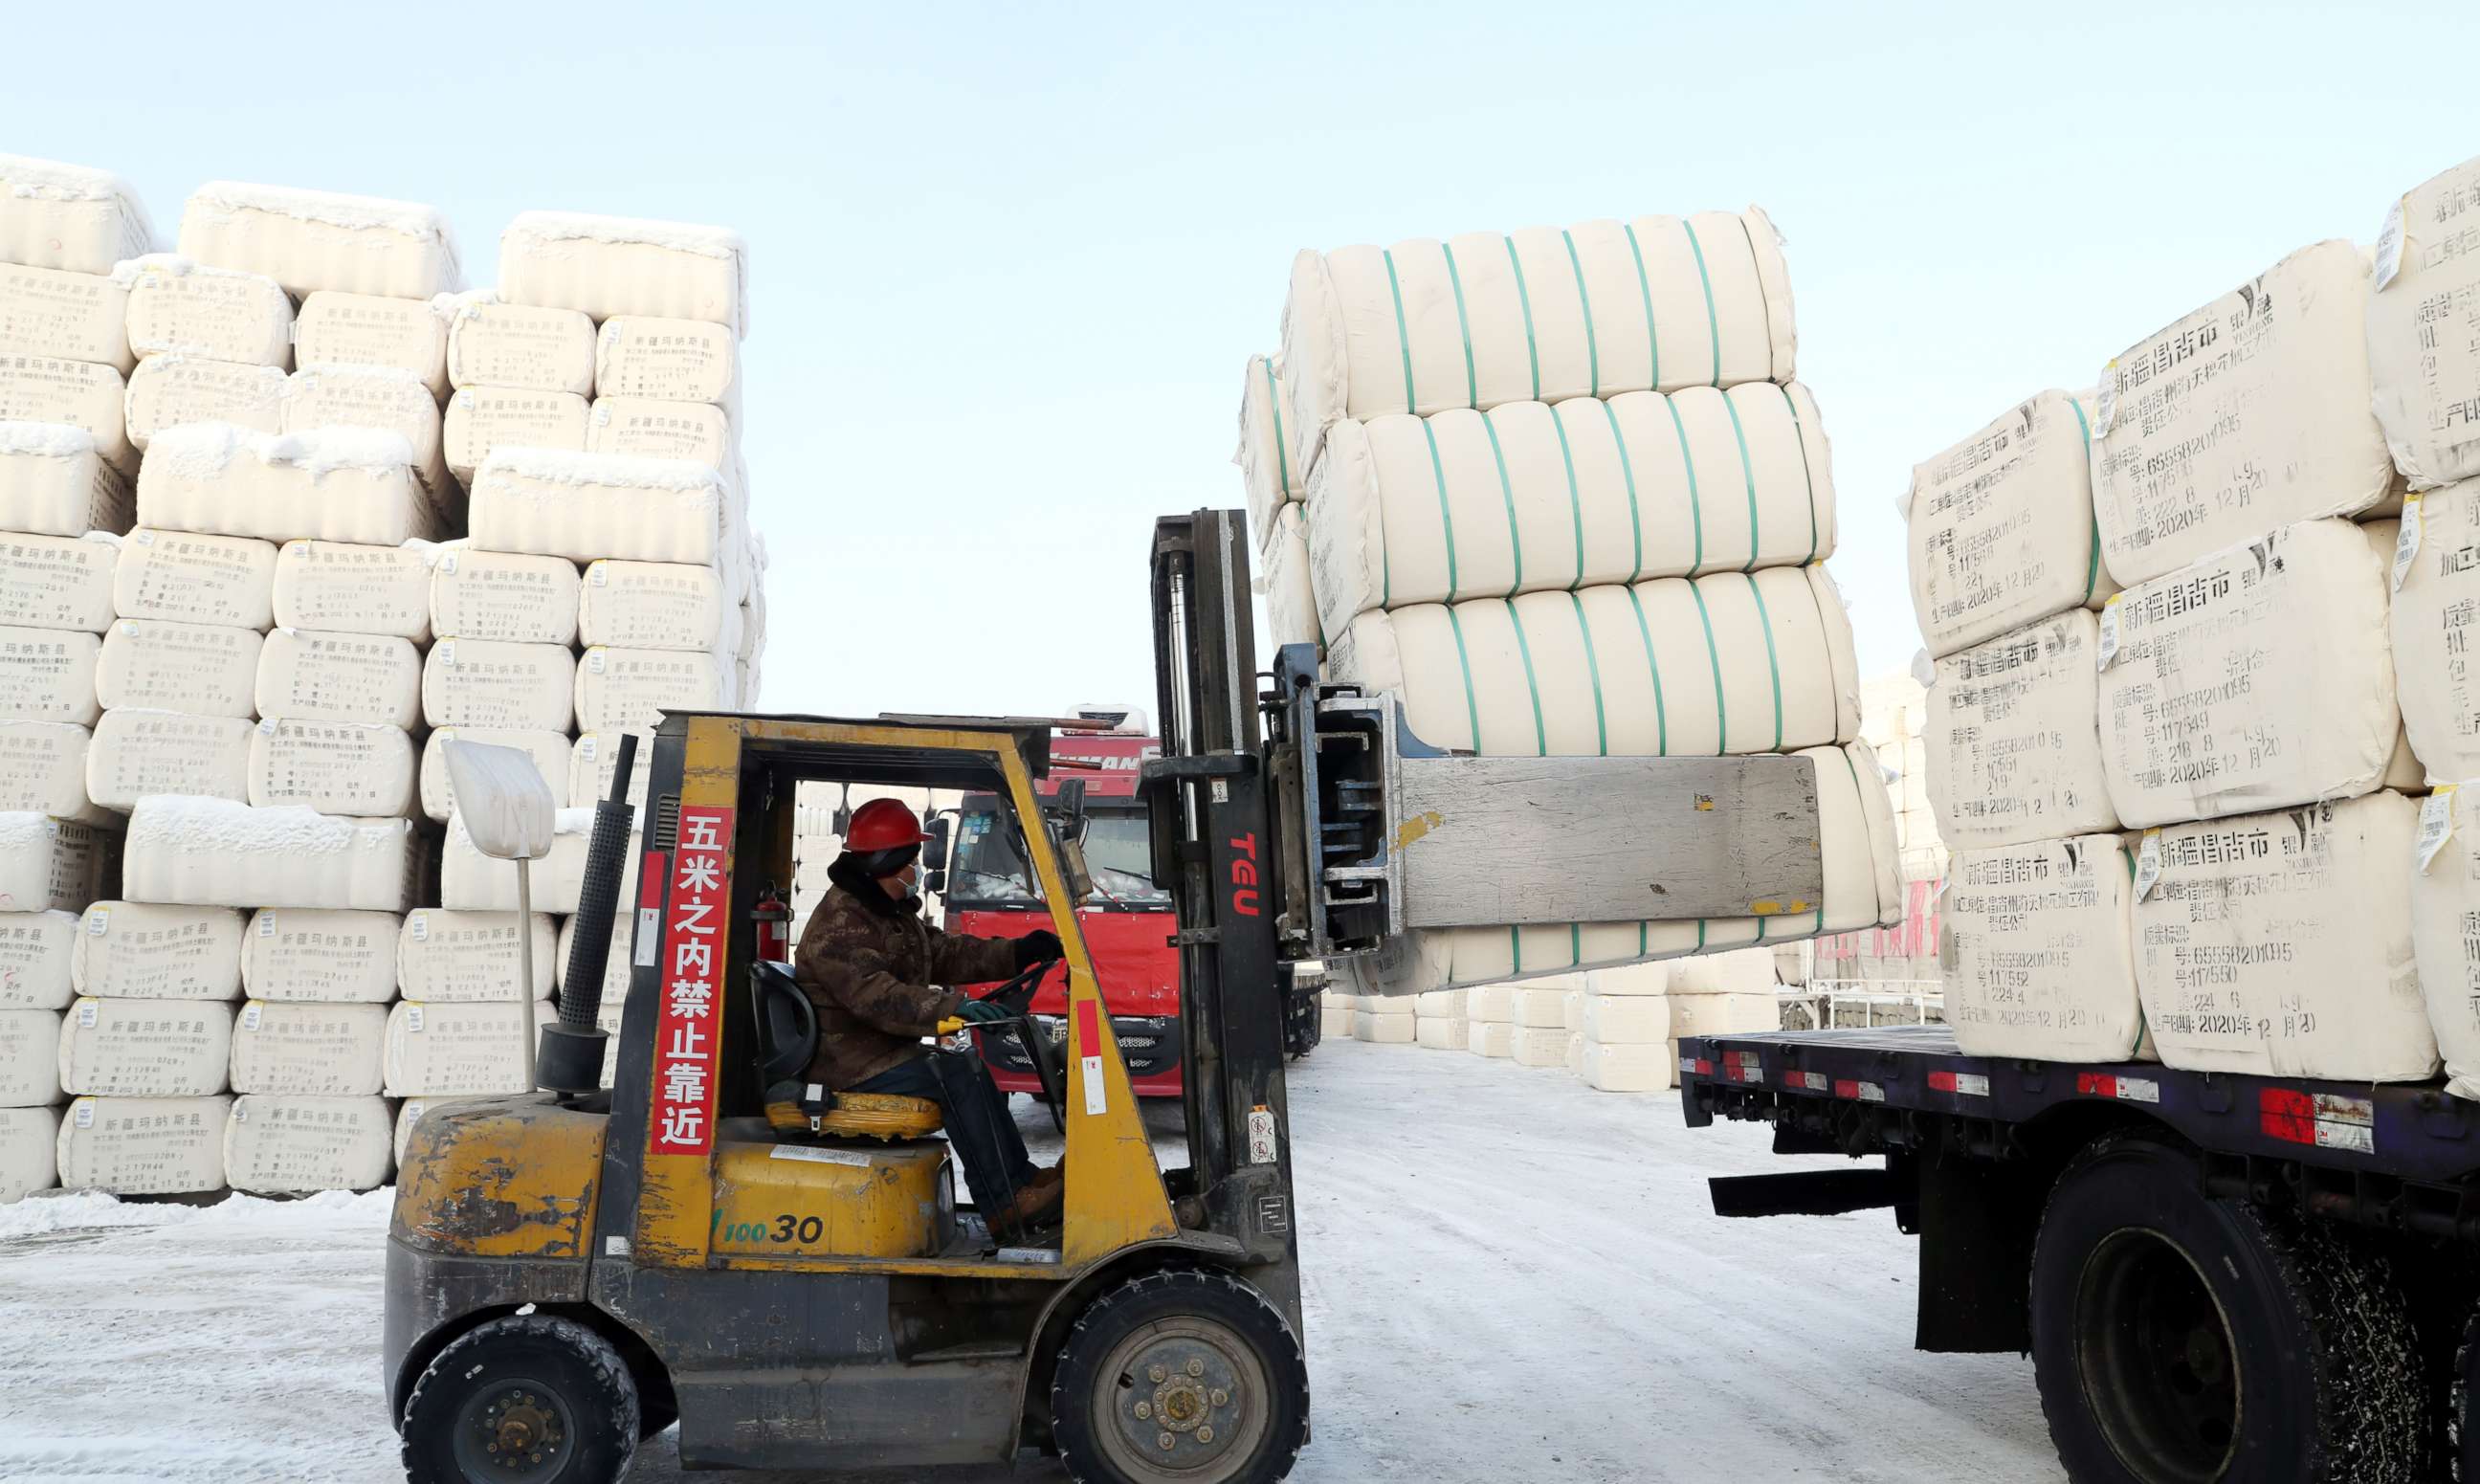 PHOTO: A worker operates a forklift truck to load bales of cotton onto a truck at a cotton warehouse on Dec. 23, 2020, in Urumqi, Xinjiang Uygur Autonomous Region of China.